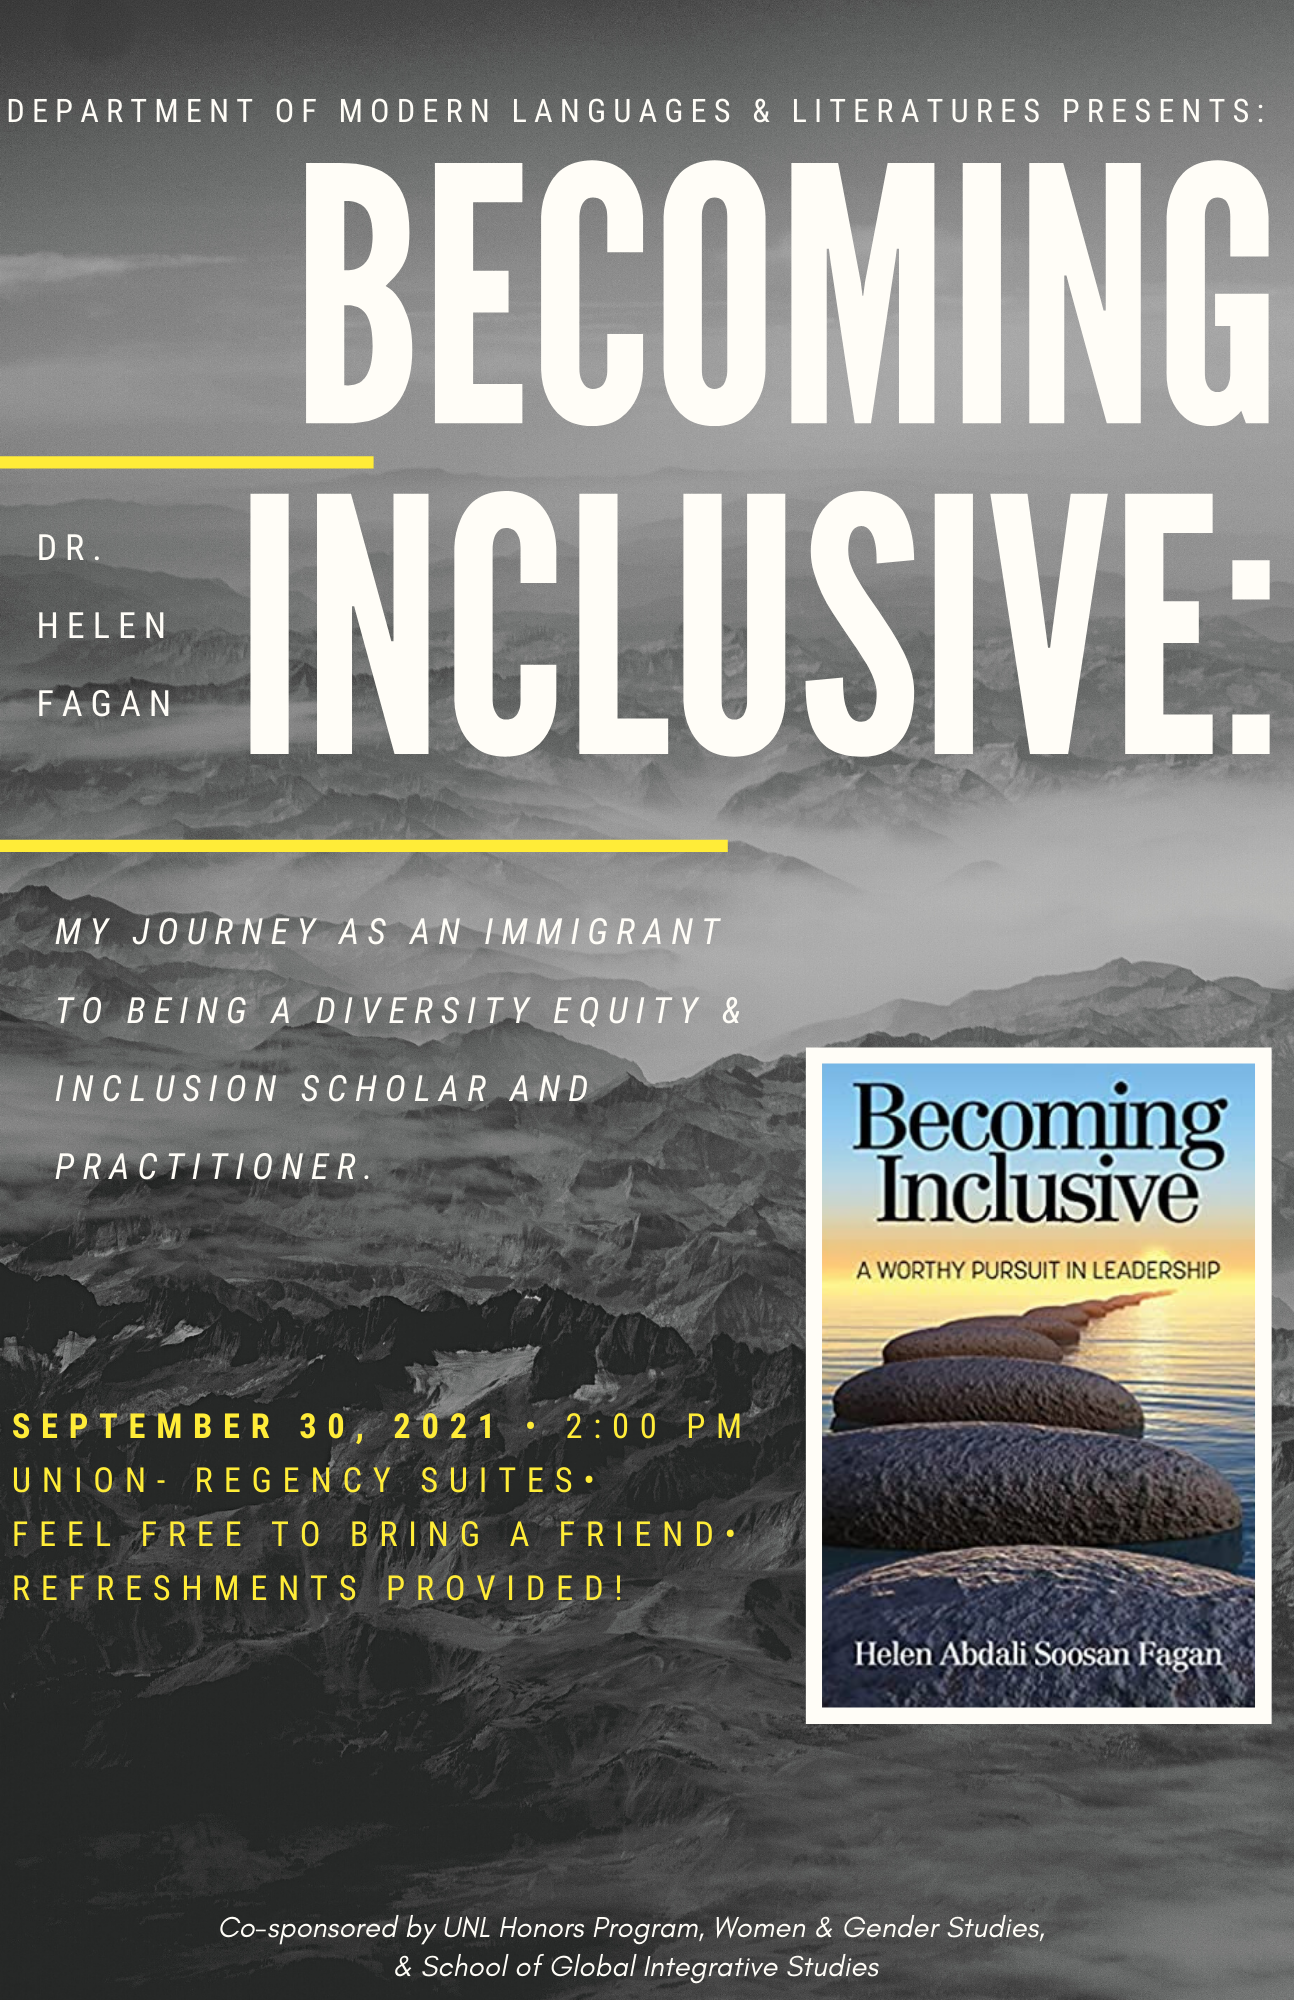 World of Migrants Event - Dr. Helen Fagan's Becoming Inclusive